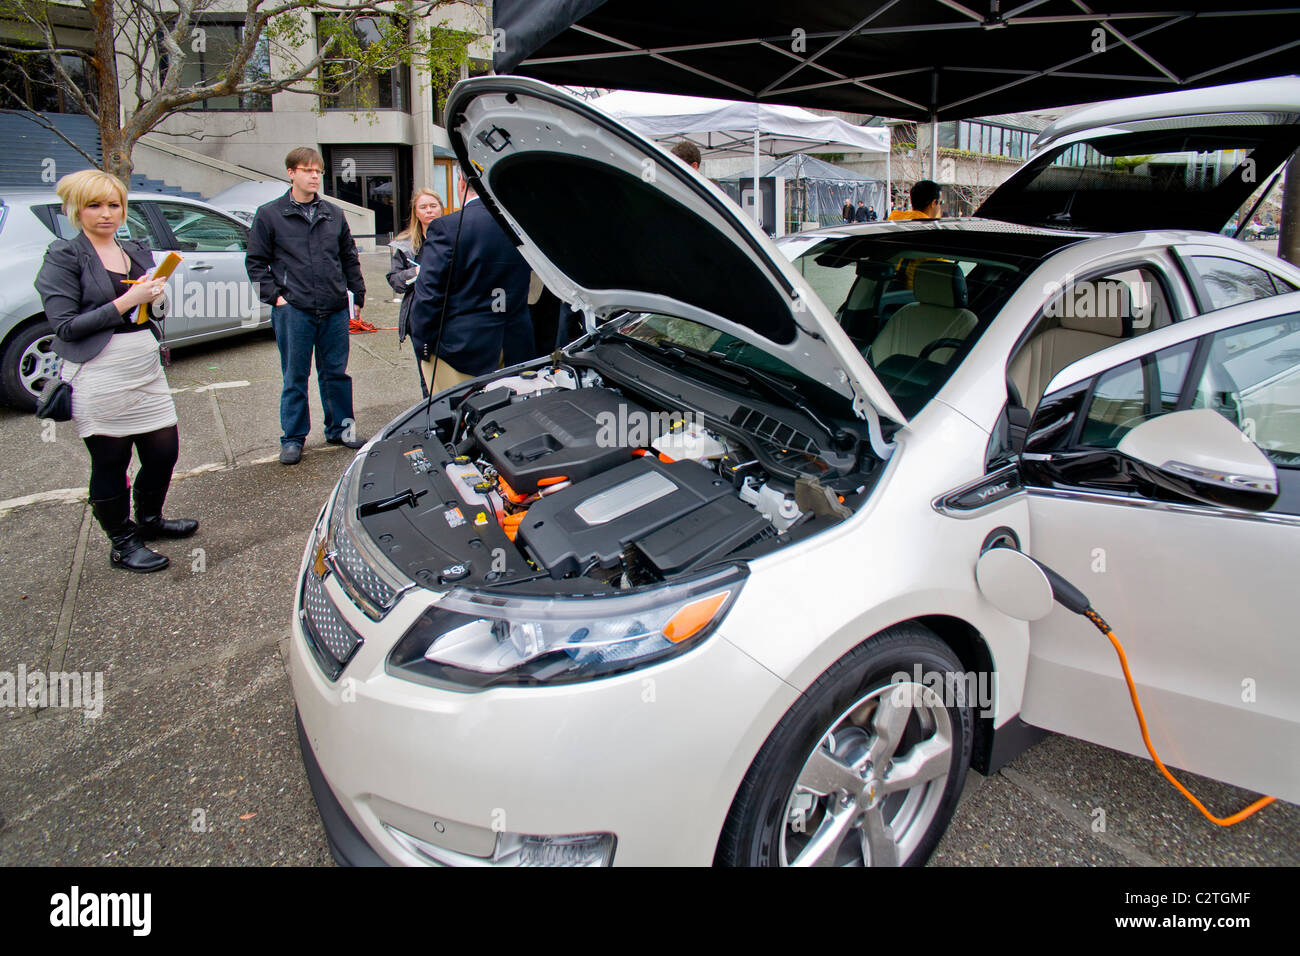 A Chevrolet Volt hybrid gas/electric car is on exhibit in Embarcadero Center in downtown San Francisco. Stock Photo